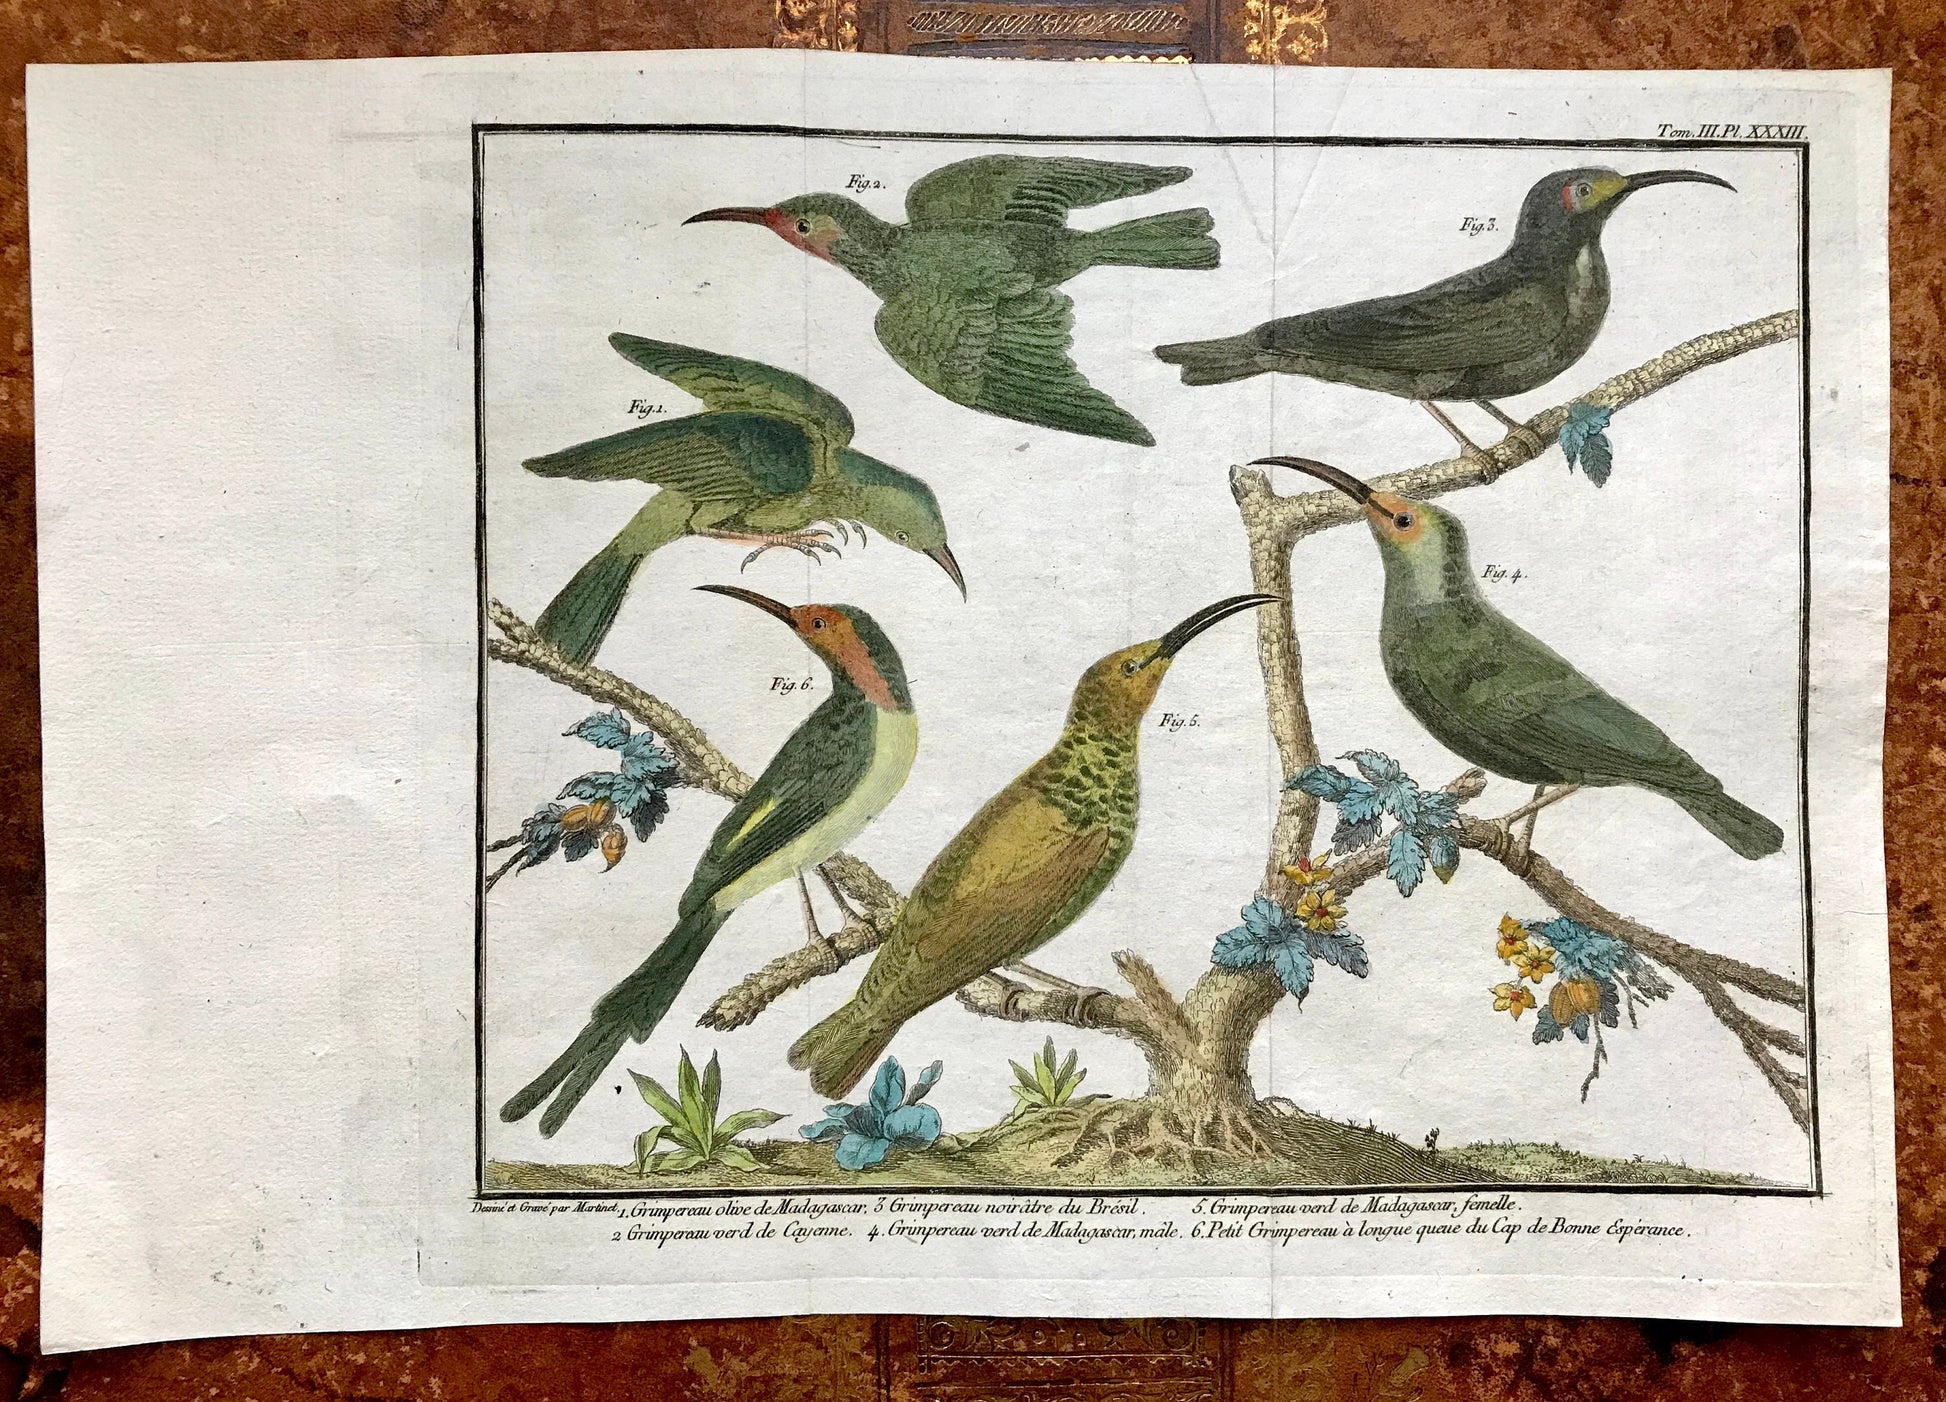 A Copper Plate Engraving of Kinds of Treecreeper. By Francois-Nicholas Martinet. Hand coloured. Dated 1770. 25 x 36.5cms.